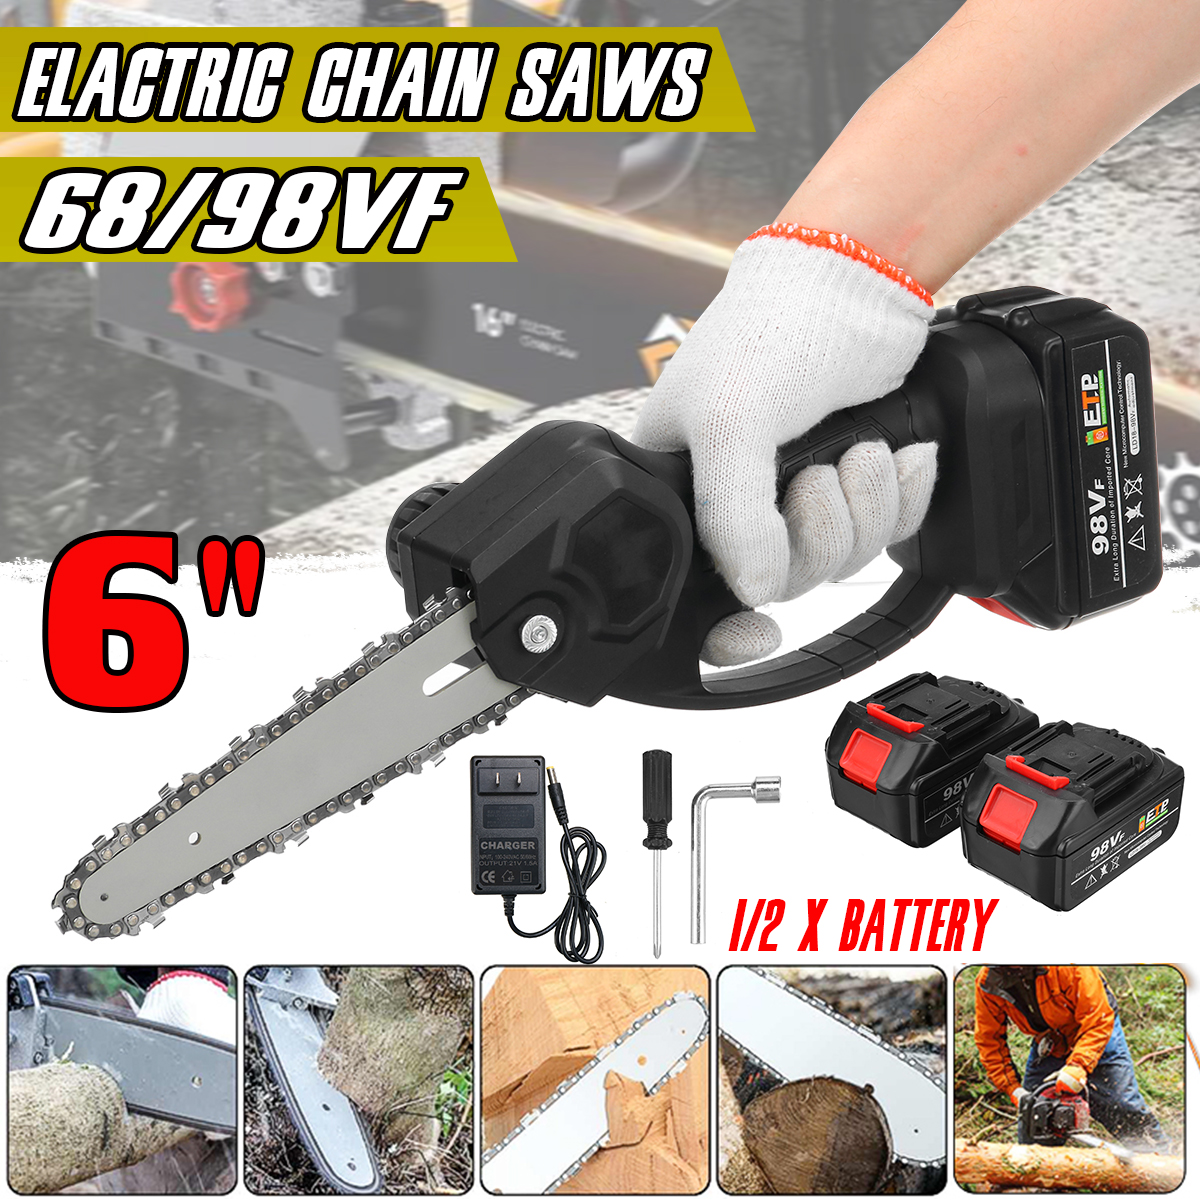 6-Inch-Cordless-Electric-Mini-Chainsaw-Rechargeable-Wood-Cutter-Chain-Saw-Woodworking-Tool-W-12pcs-B-1849932-2